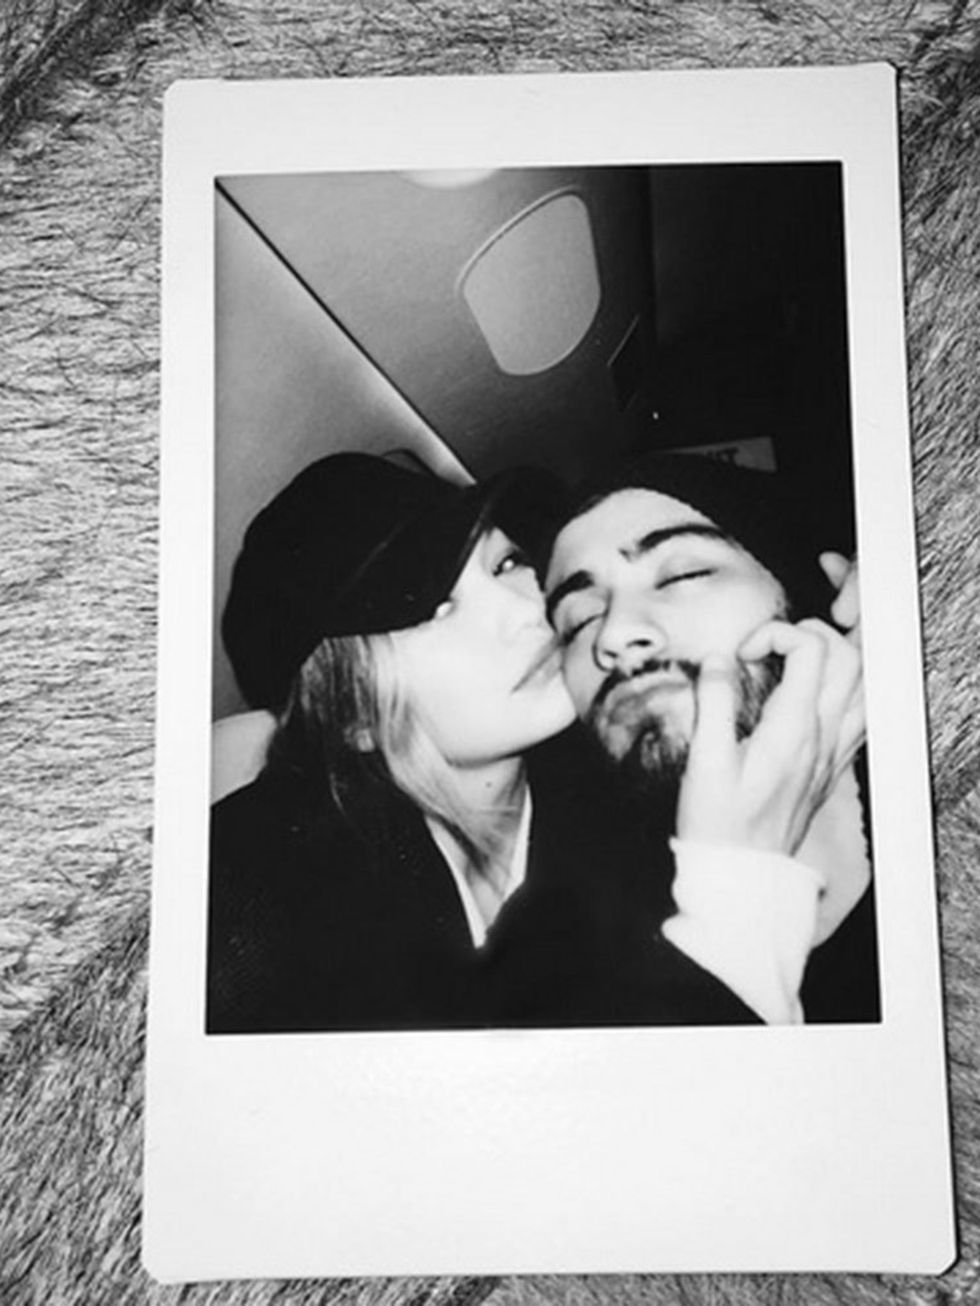 Zayn Malik and Gigi Hadid proved they were officially dating after Zayn posted their first couple photo on Instagram.